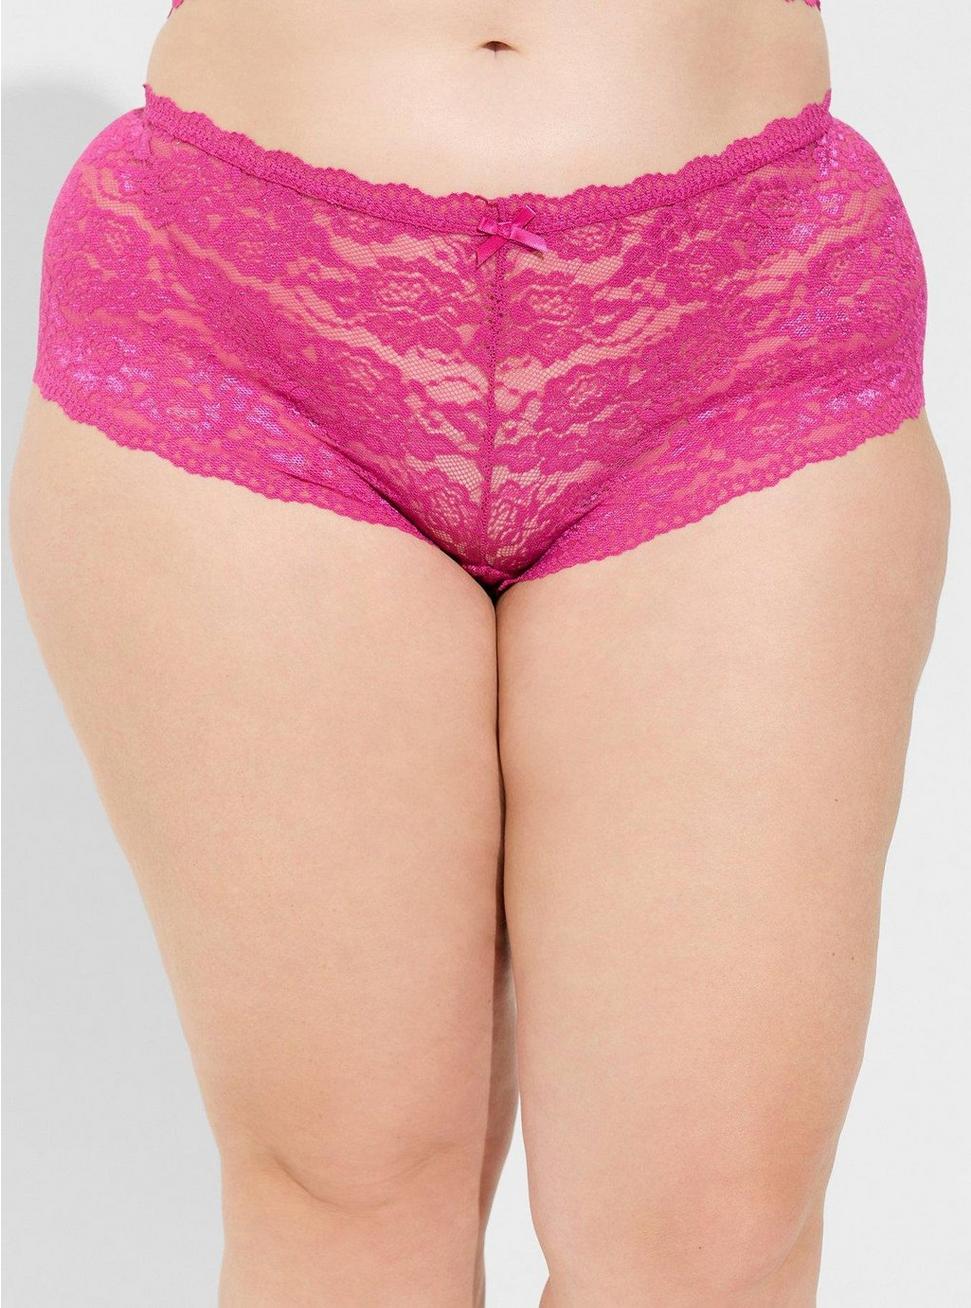 Simply Lace Mid-Rise Cheeky Panty, FUCHSIA RED, alternate